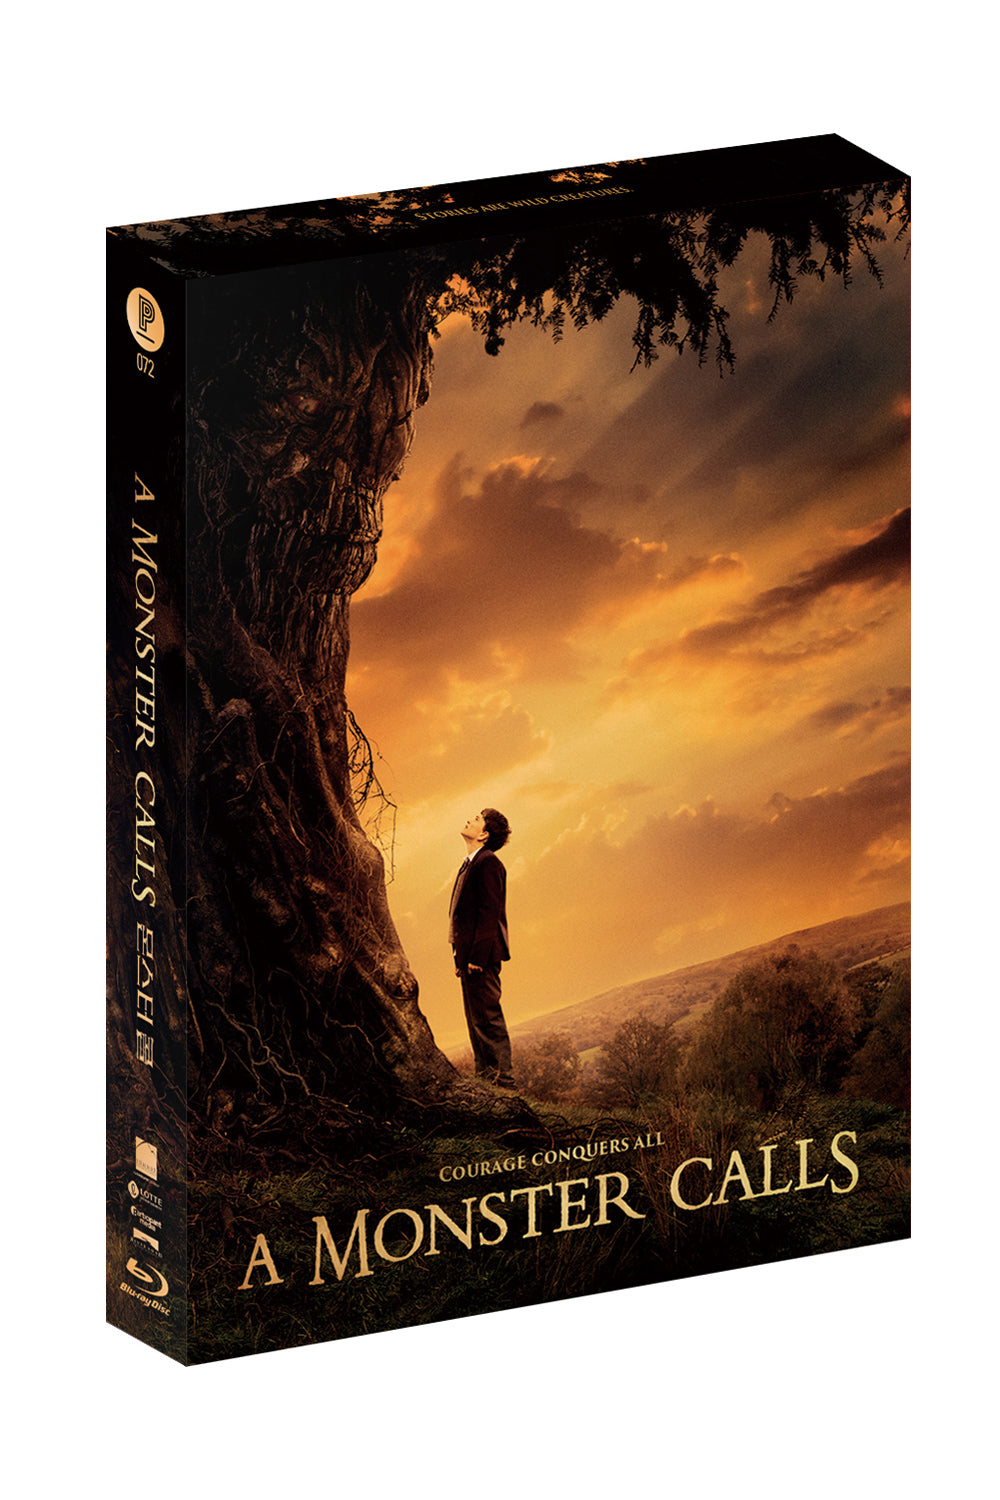 A Monster Calls: Steelbook with Full Slip (Type A) - PLAIN ARCHIVE